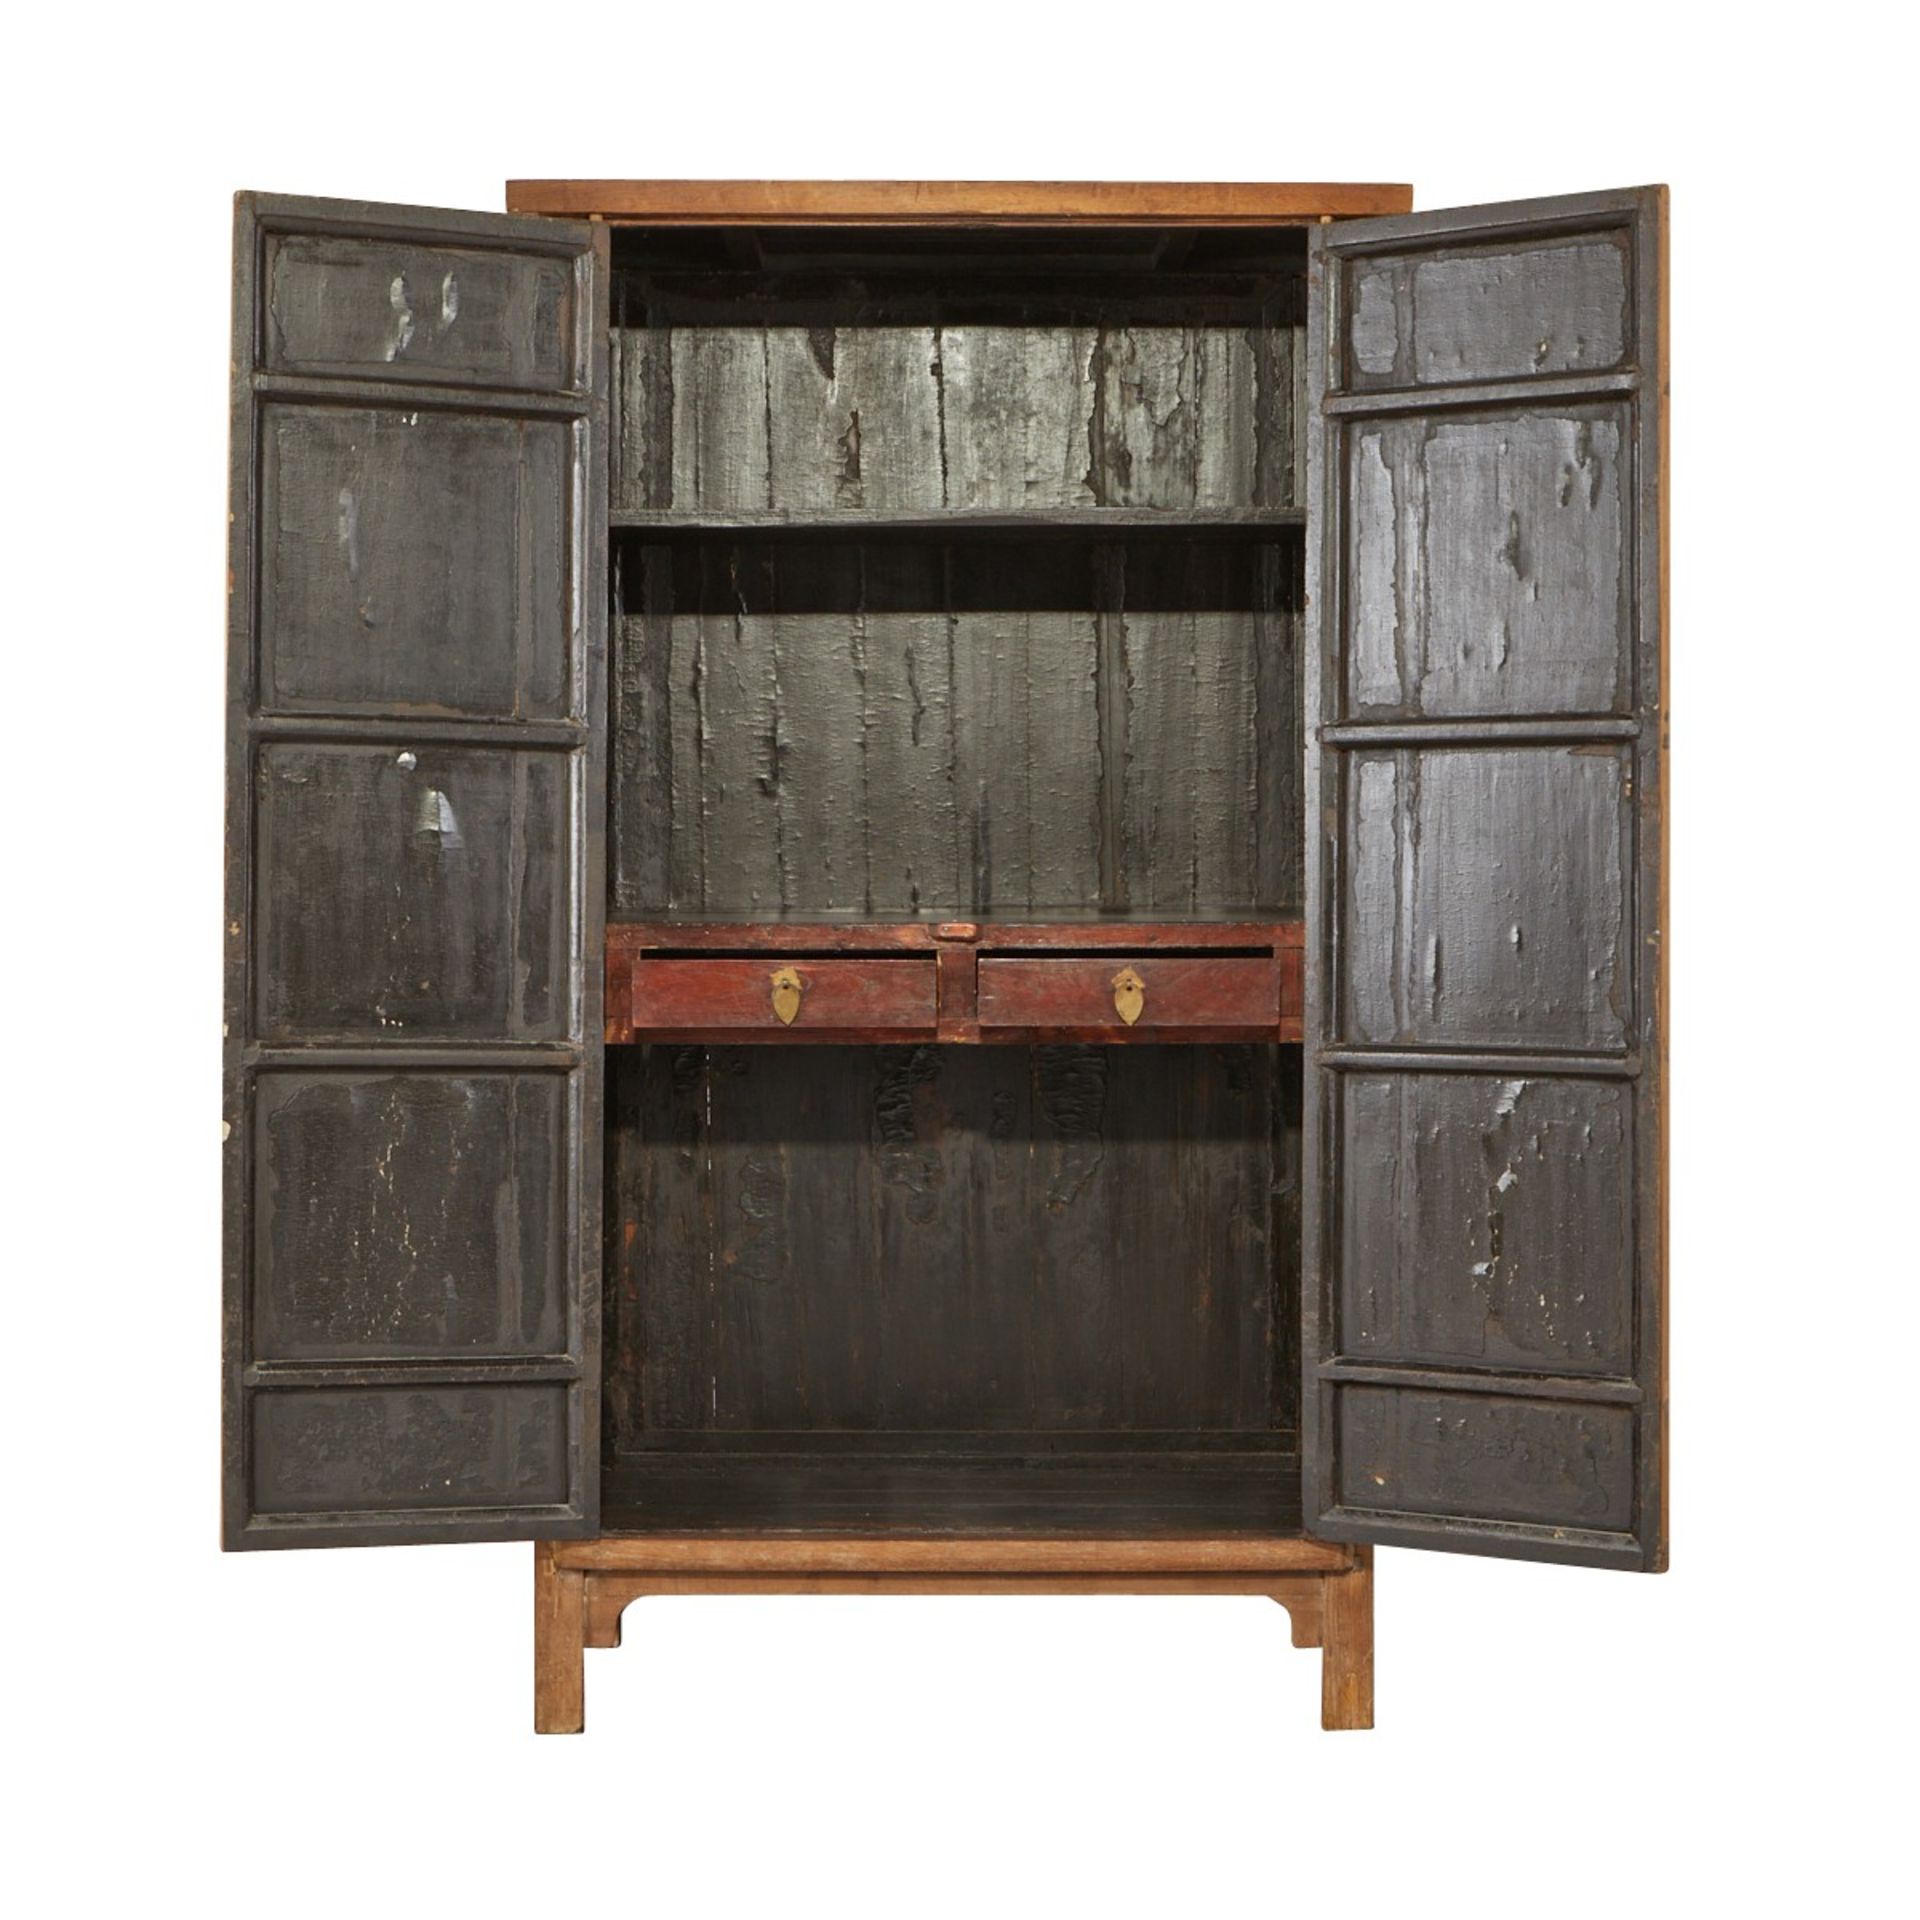 Antique Chinese Wood Cabinet or Wardrobe - Image 2 of 15